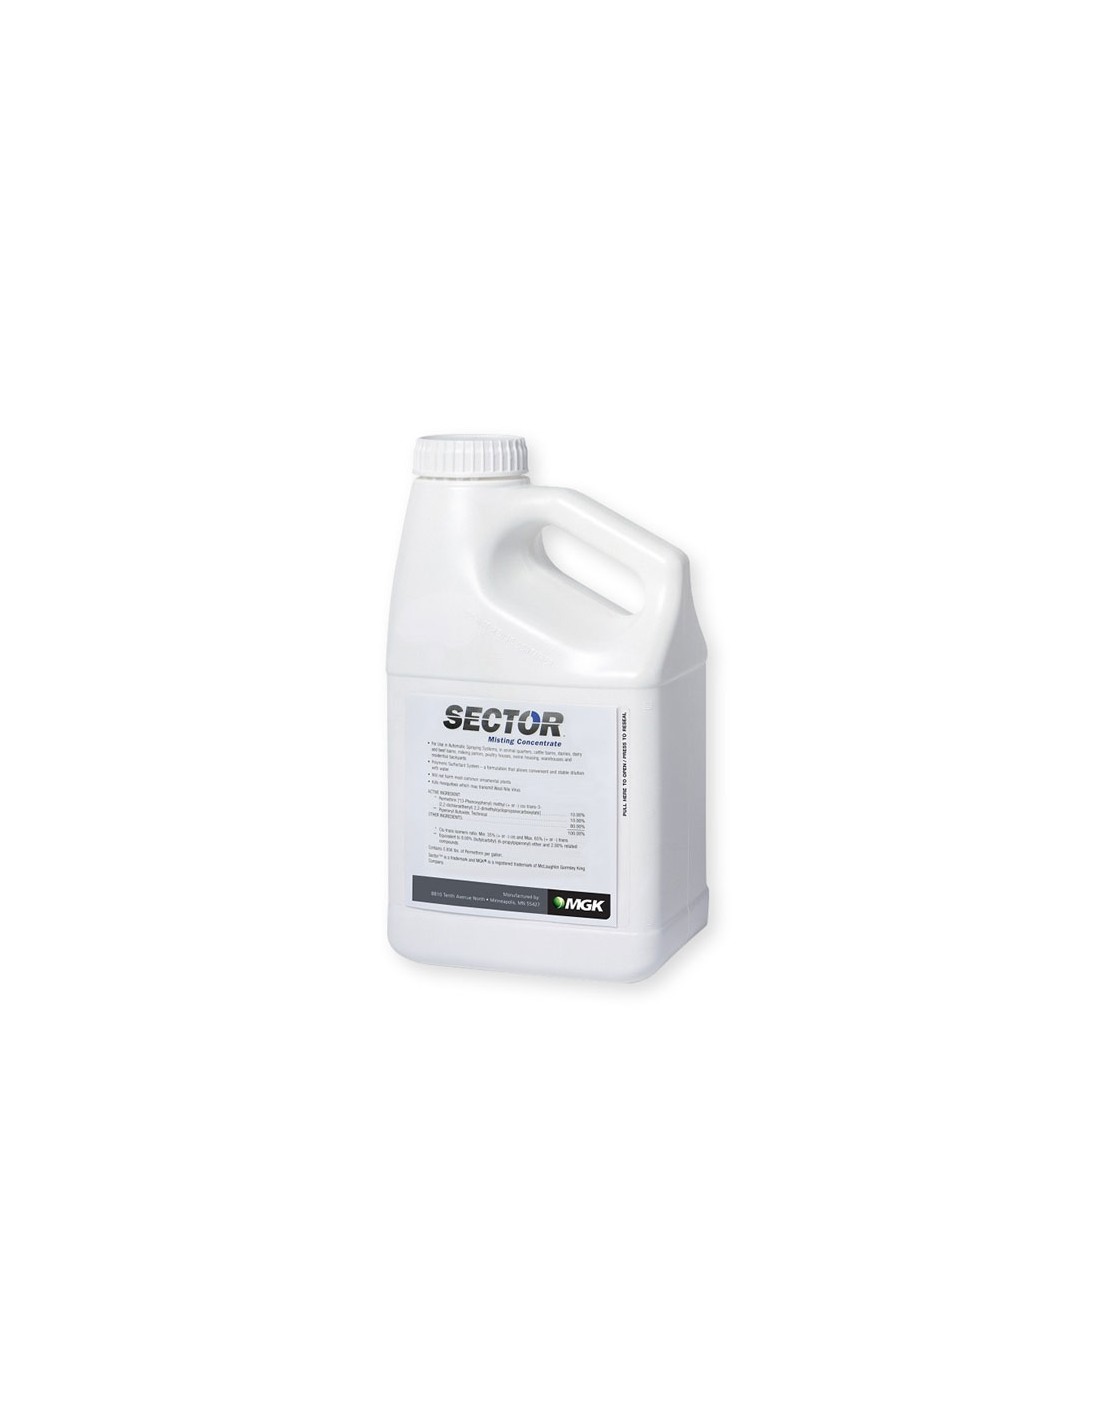 Is Sector Misting Concentrate a good choice to use with a backpack mister such as Solo for mosquito control